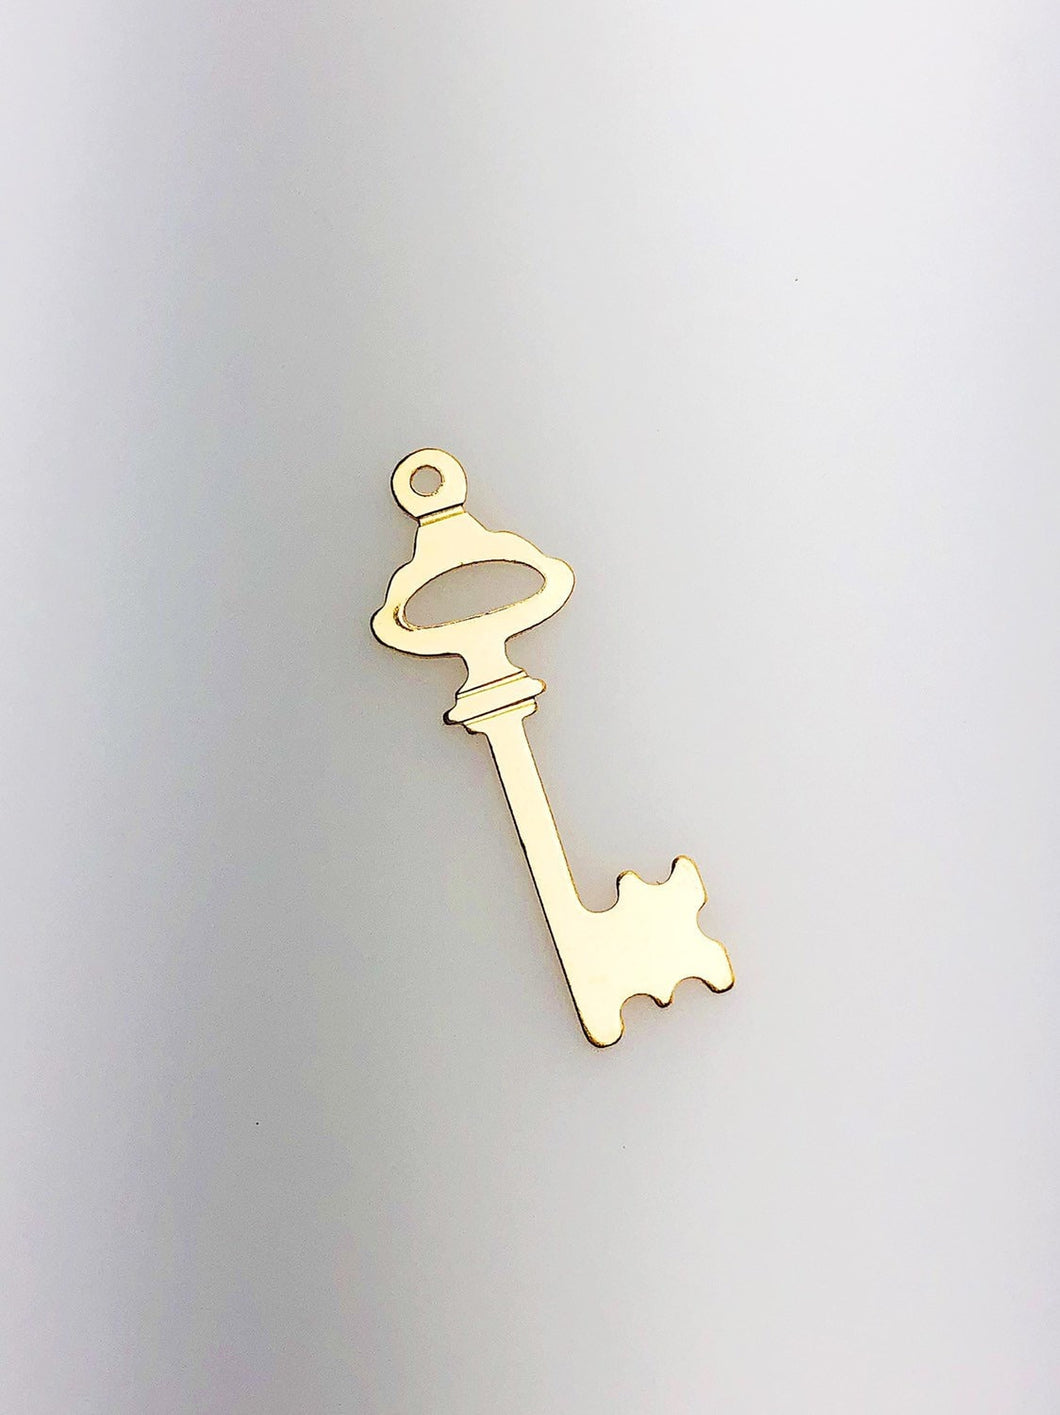 14K Gold Fill Key Charm w/ Ring, 8.0x24.0mm, Made in USA - 399